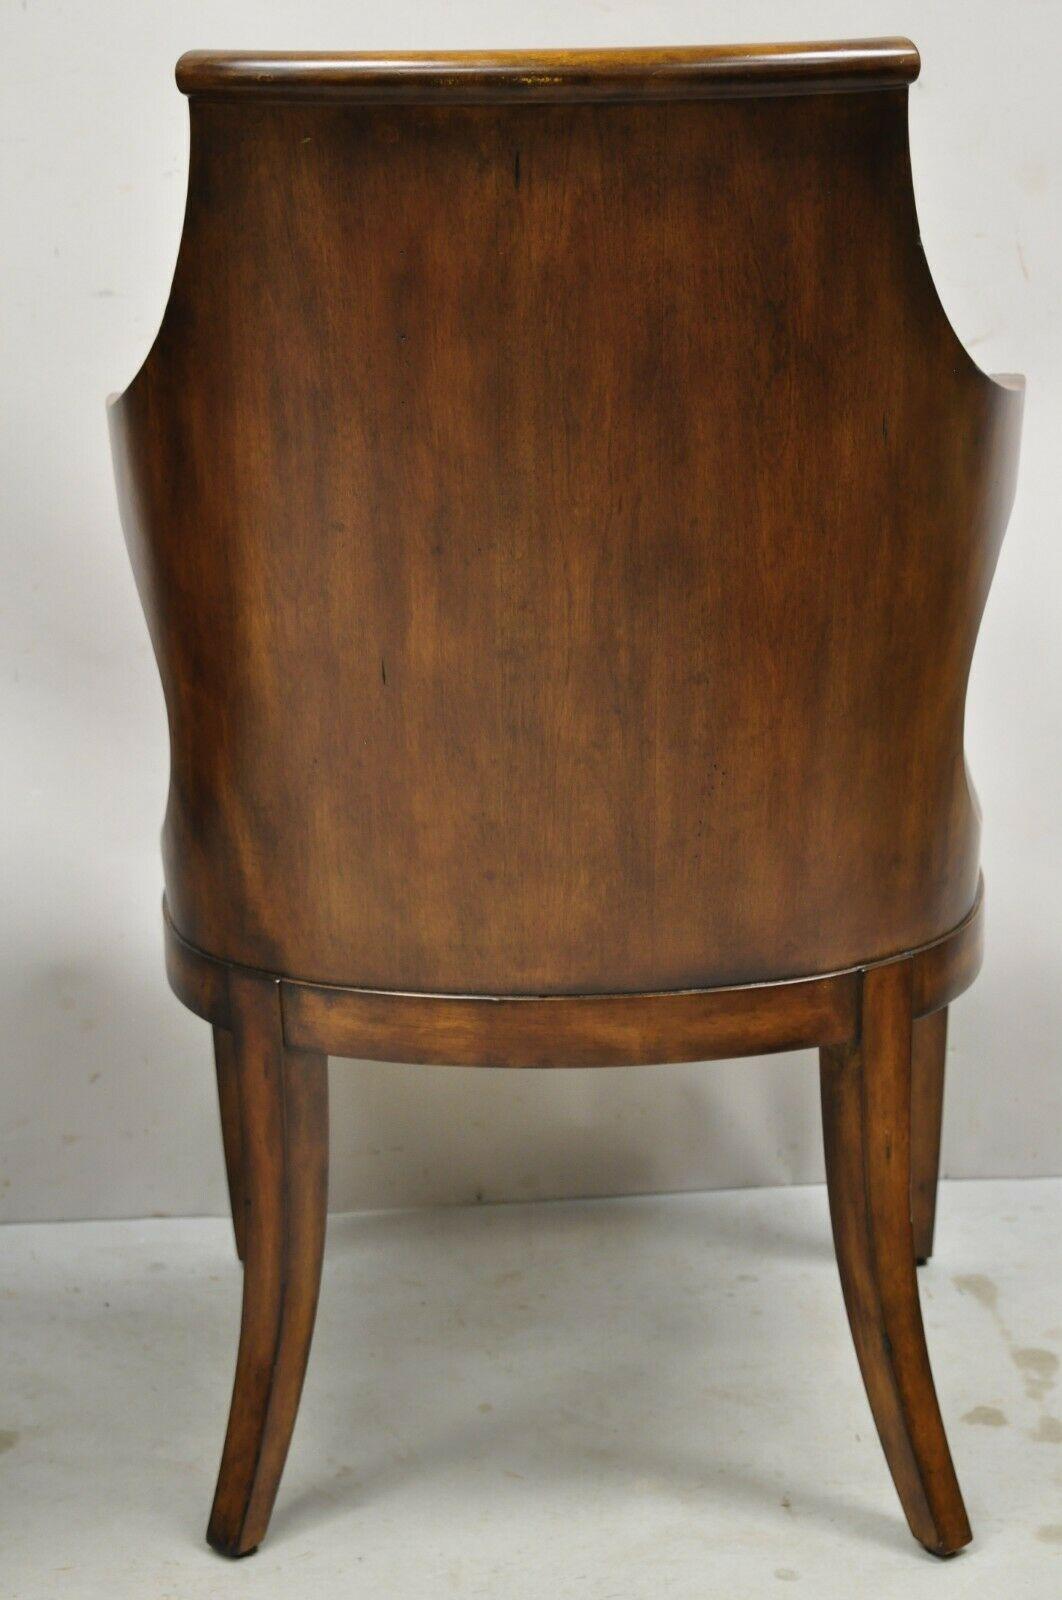 English Regency Empire Style Wood Barrel Back Side Chairs, a Pair 7